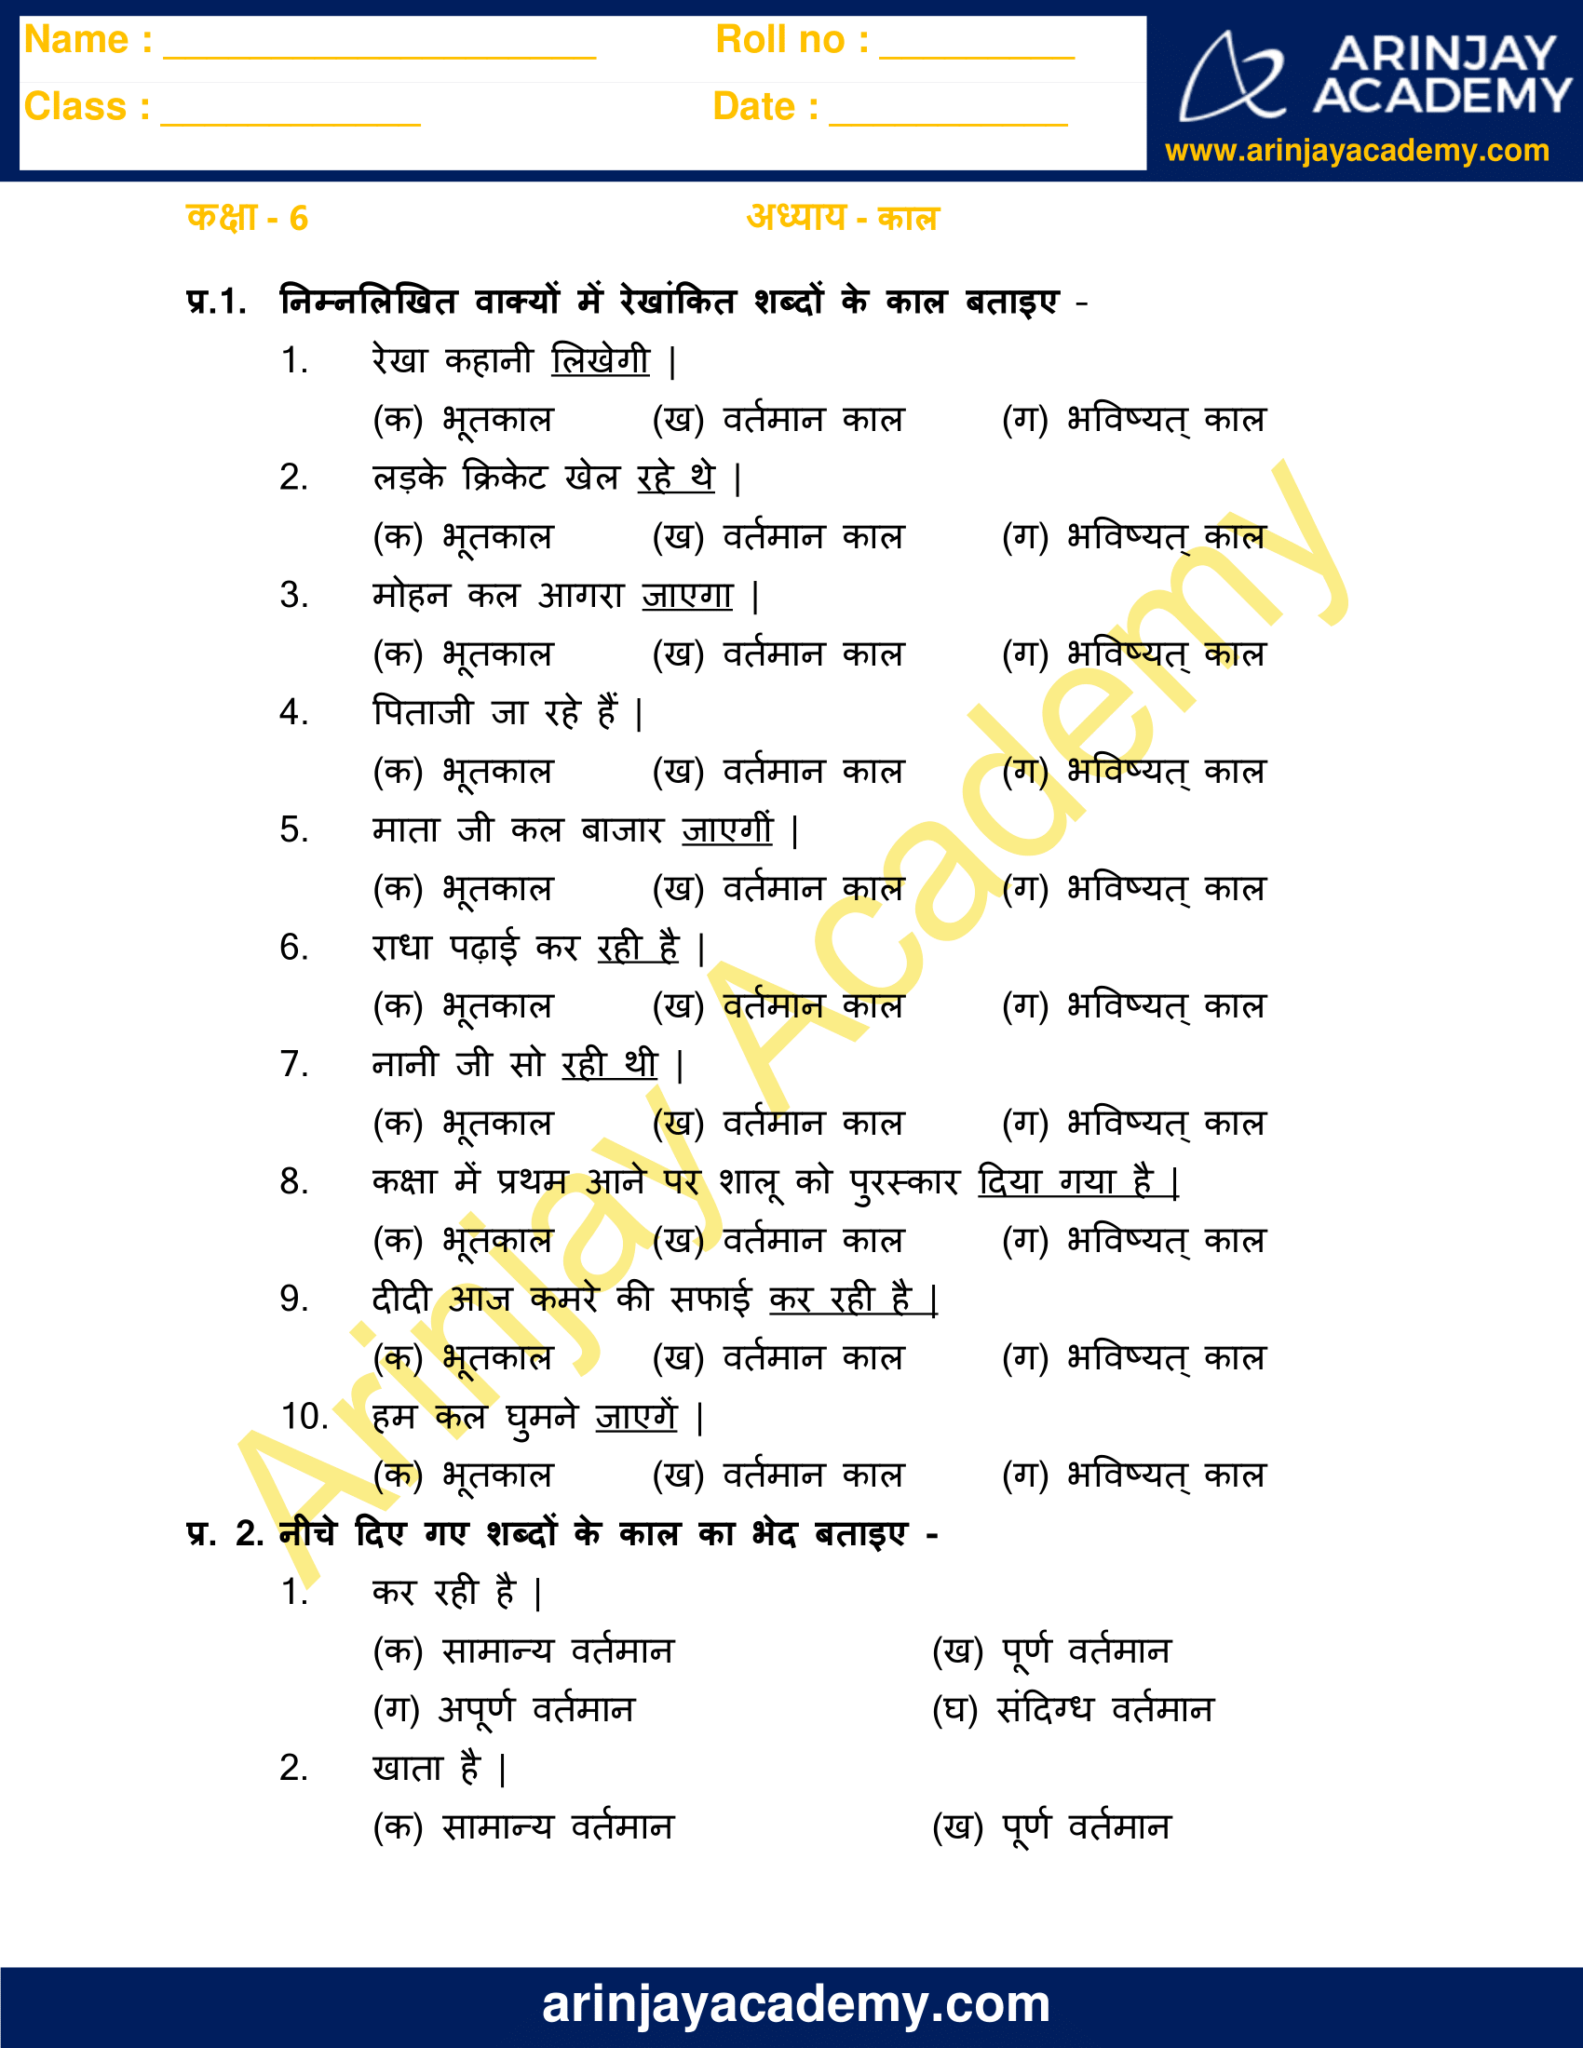 hindi-grammar-kaal-exercises-for-class-6-free-and-printable-hindi-grammar-kaal-worksheets-for